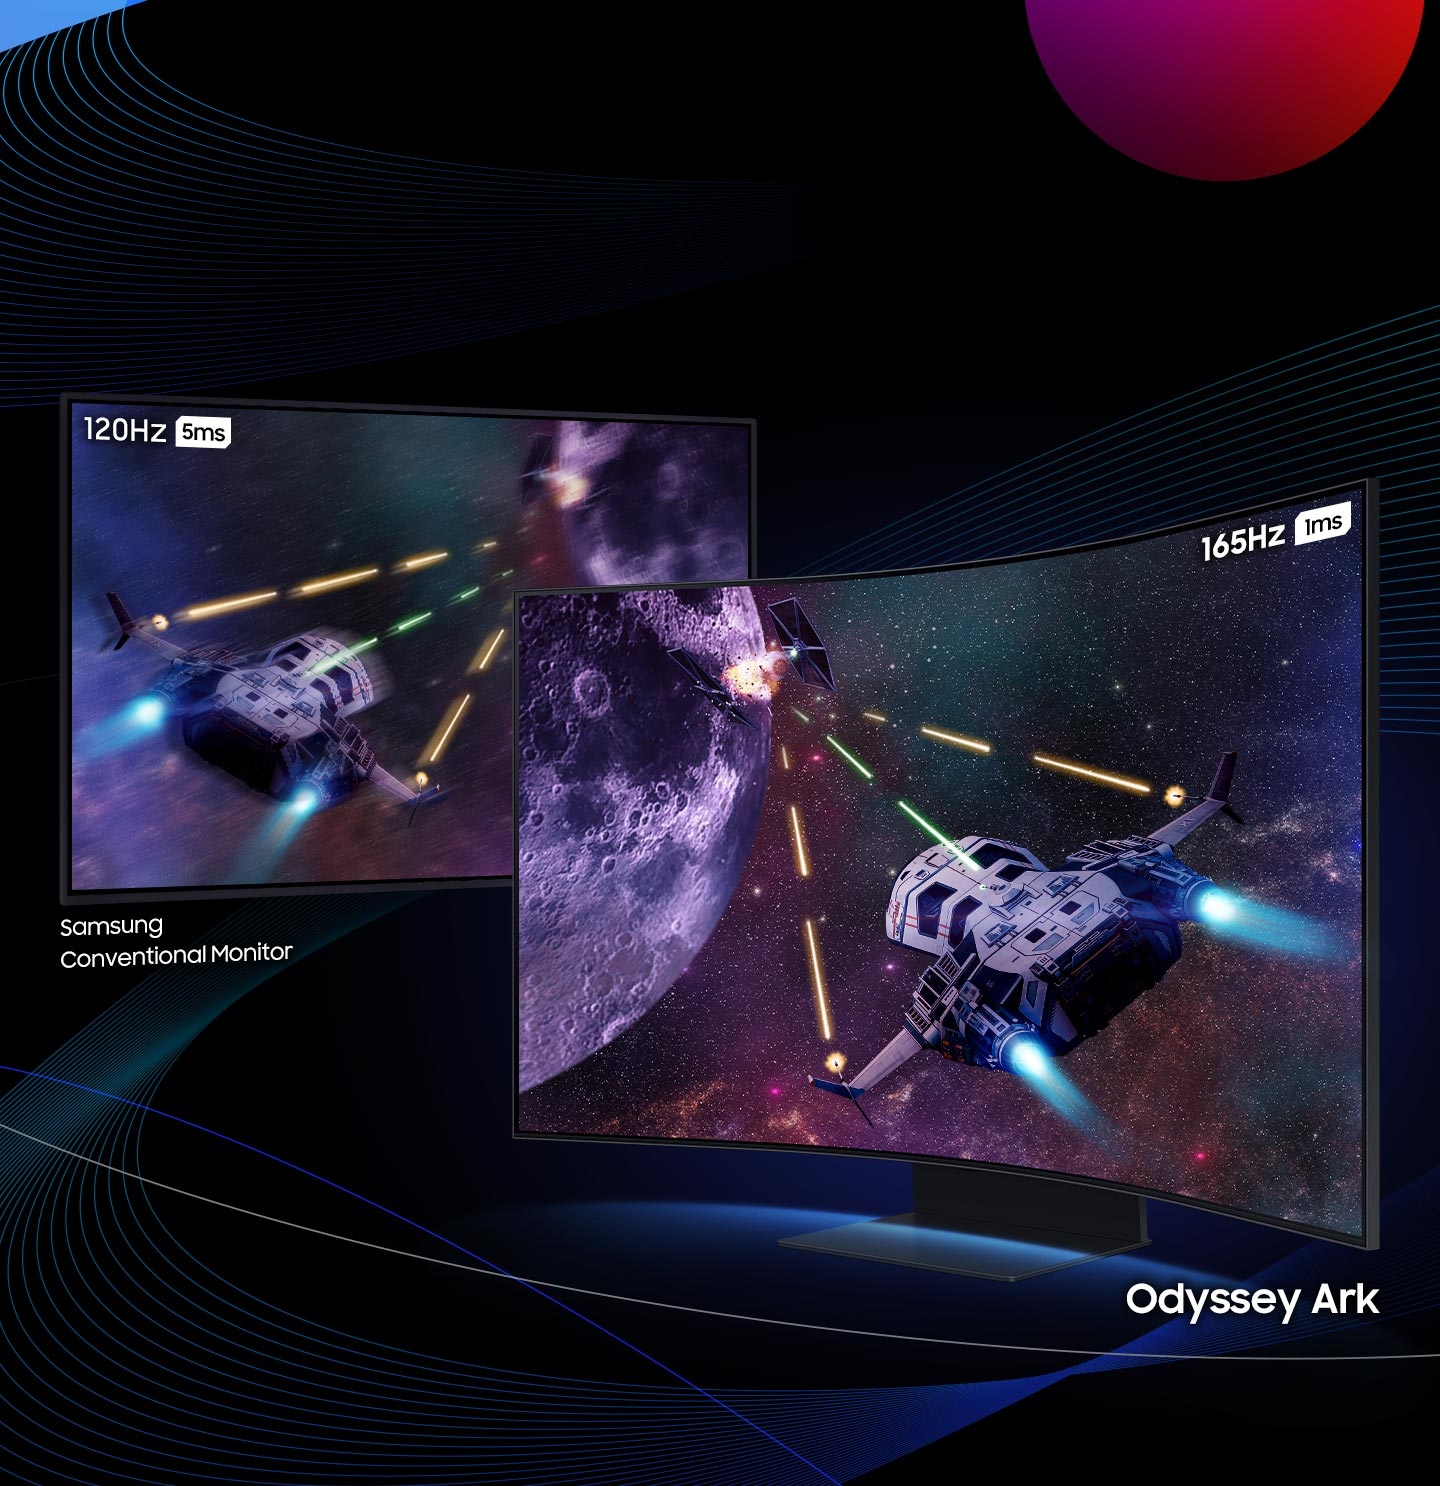 Two rocket ships are flying away firing missiles at the same planet. The screen is split diagonally with the left side showing 120Hz refresh rate and 5ms response time compared to the right side which shows 165Hz refresh rate and 1ms response time, demonstrating the difference between a conventional monitor and Odyssey Ark.